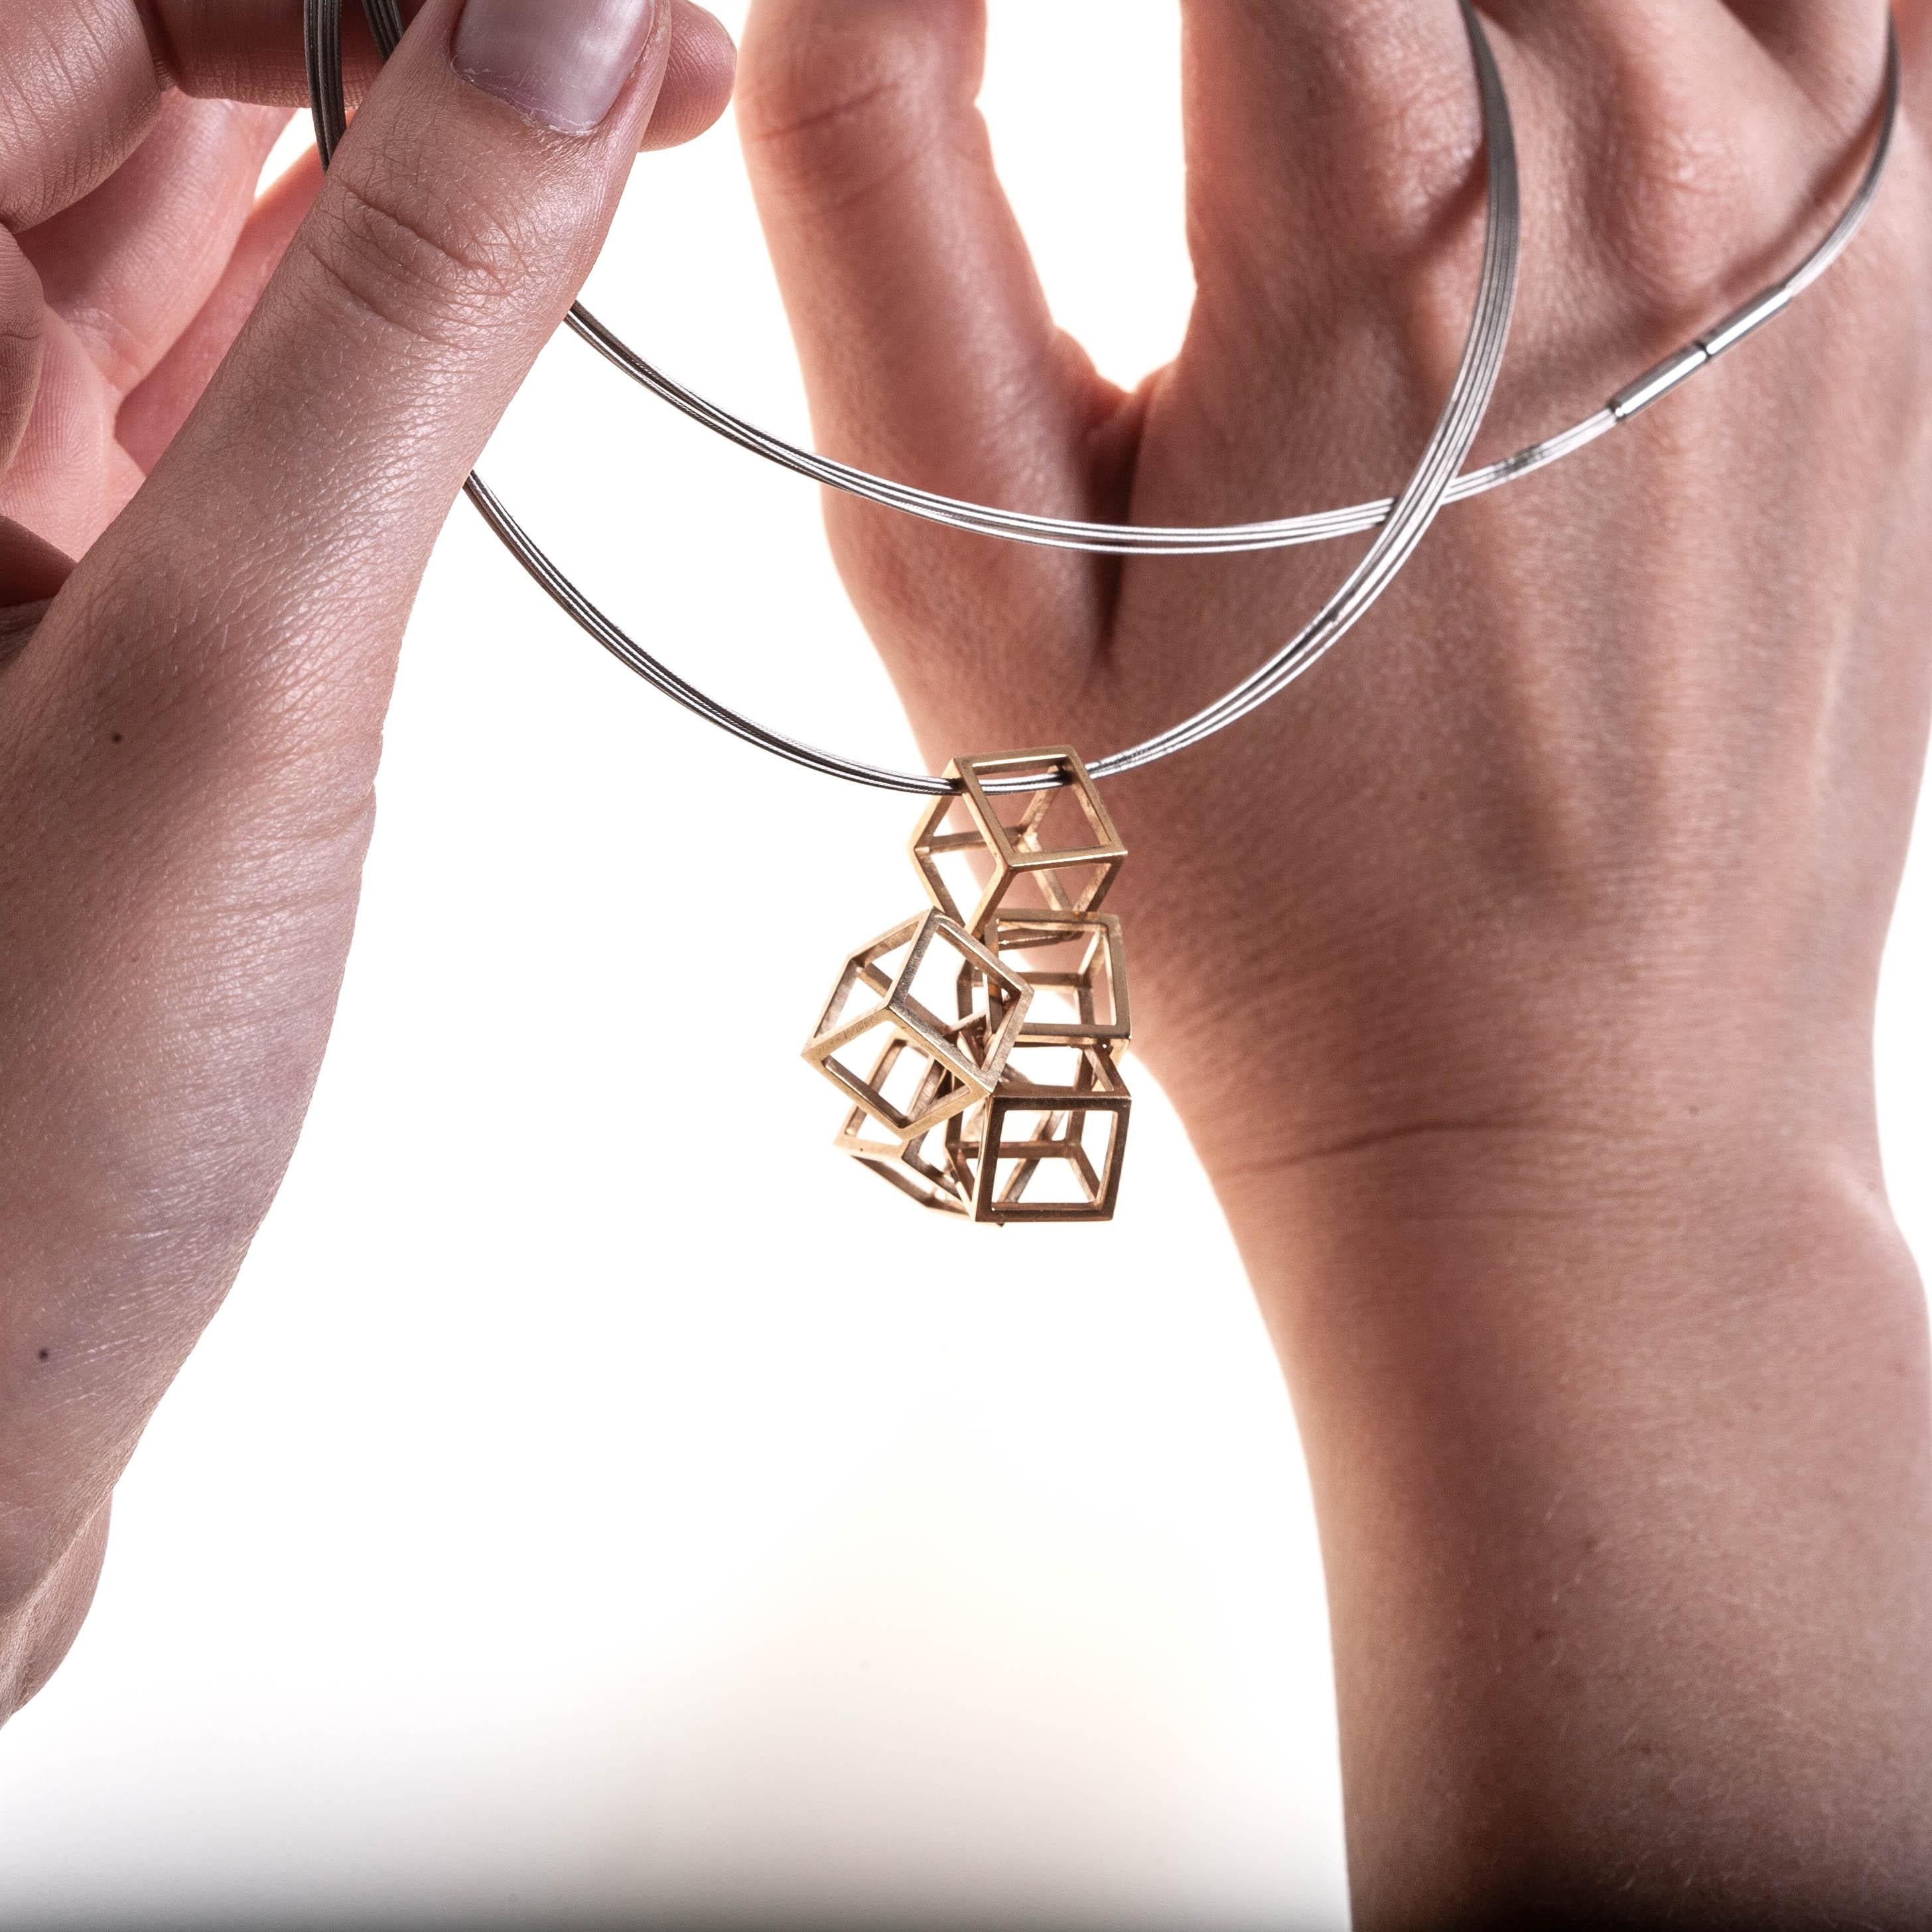 6 Hollow Geometric Cubes Statement Pendant 18K Gold, on a Stainless Steel Coil

This Cubes Pendant is for a sophisticated woman. It contains 6 geometric cubes  made in 18k gold. 
A beautiful statement pendant set on Stainless Steel coil , Modern and